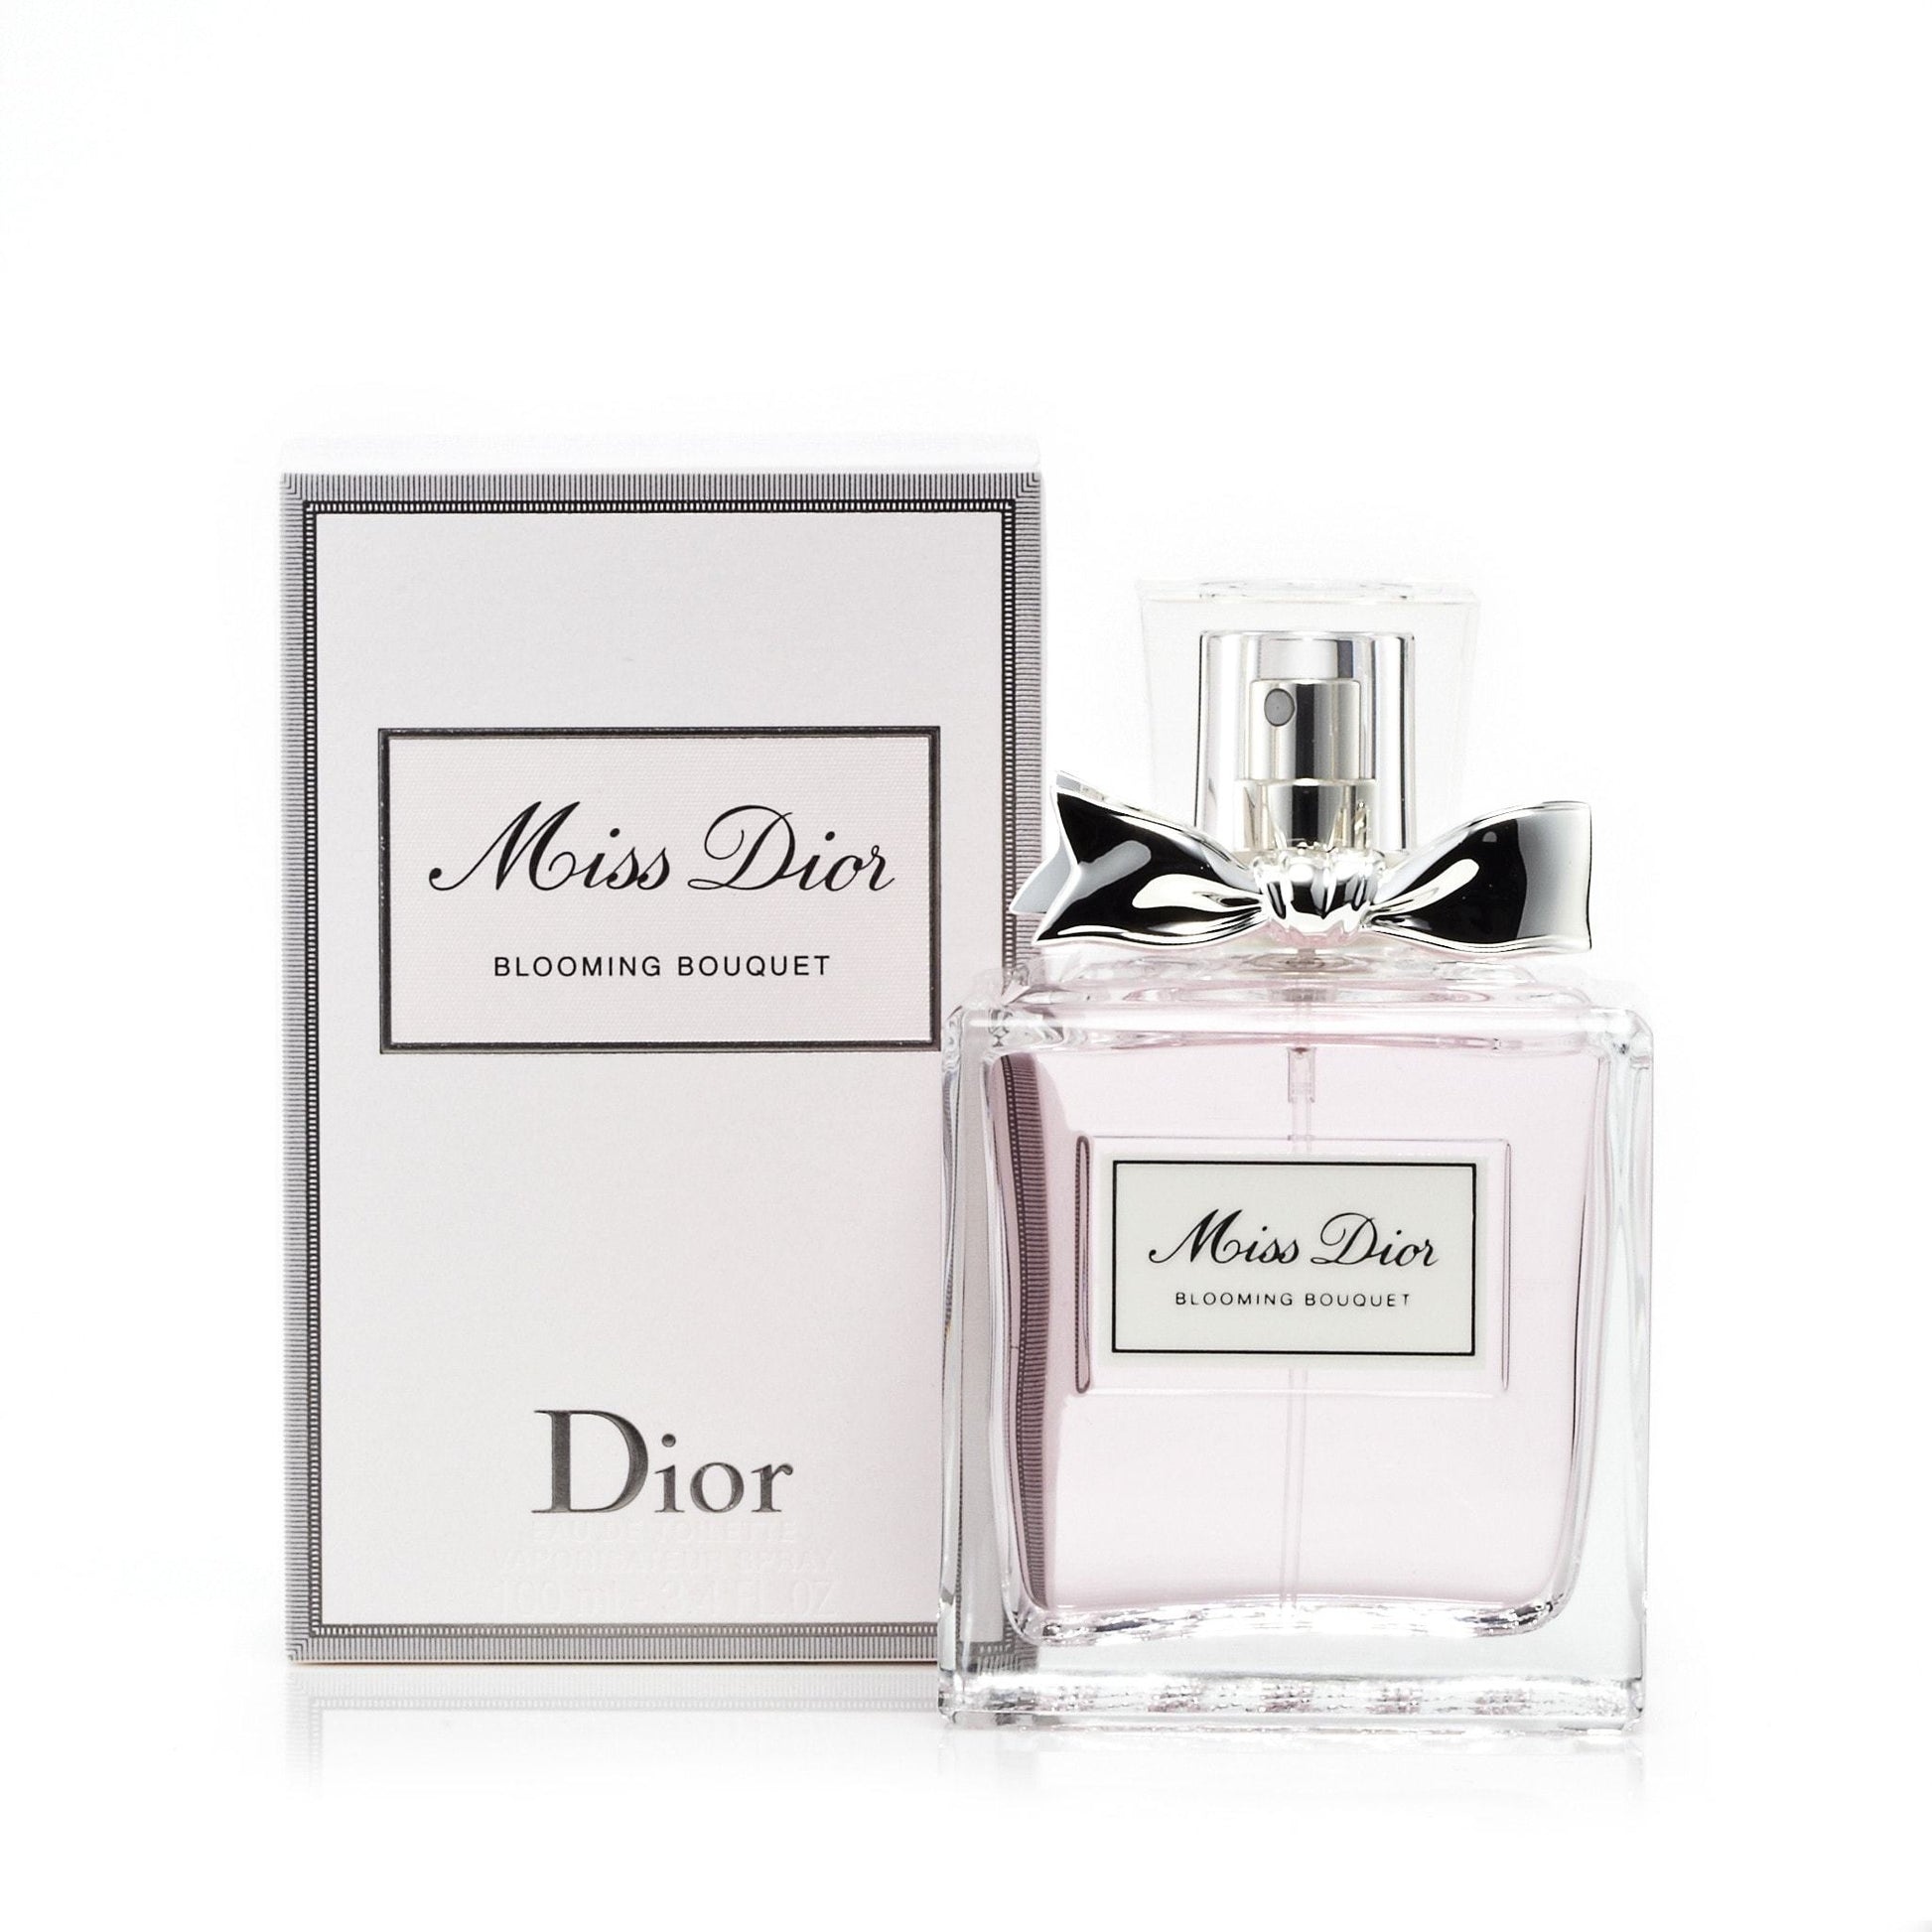 Dior Miss Dior Blooming Bouquet Eau de Toilette Womens Spray 3.4 oz. Click to open in modal